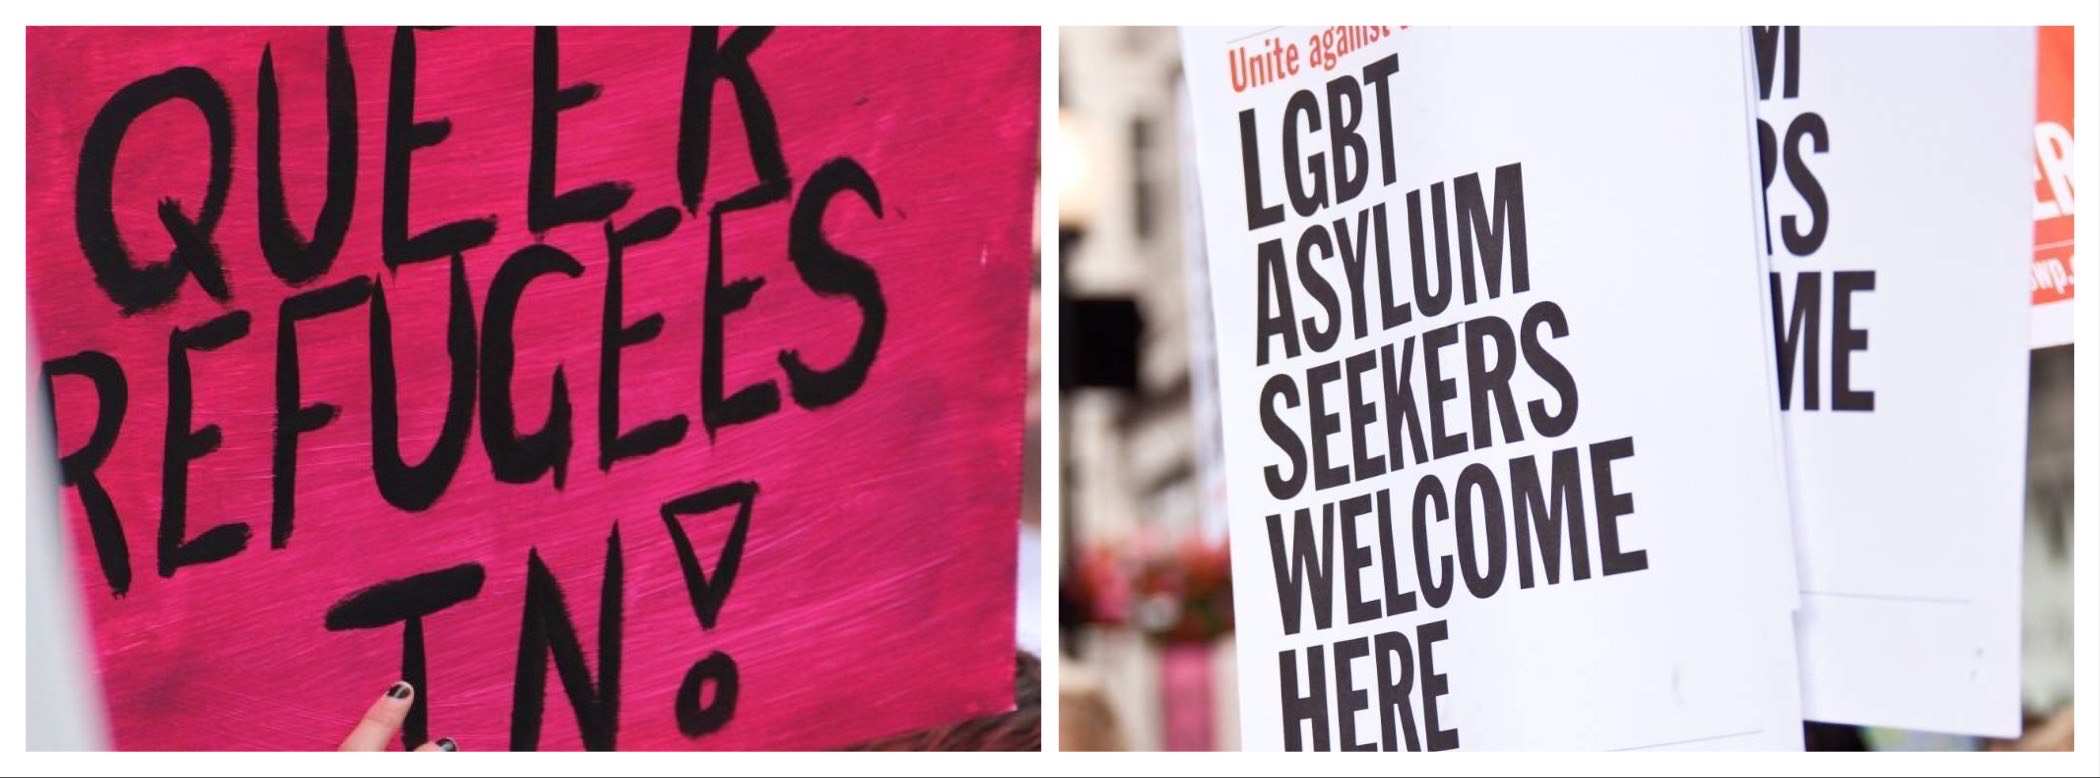 Queer refugees and asylum seekers welcome